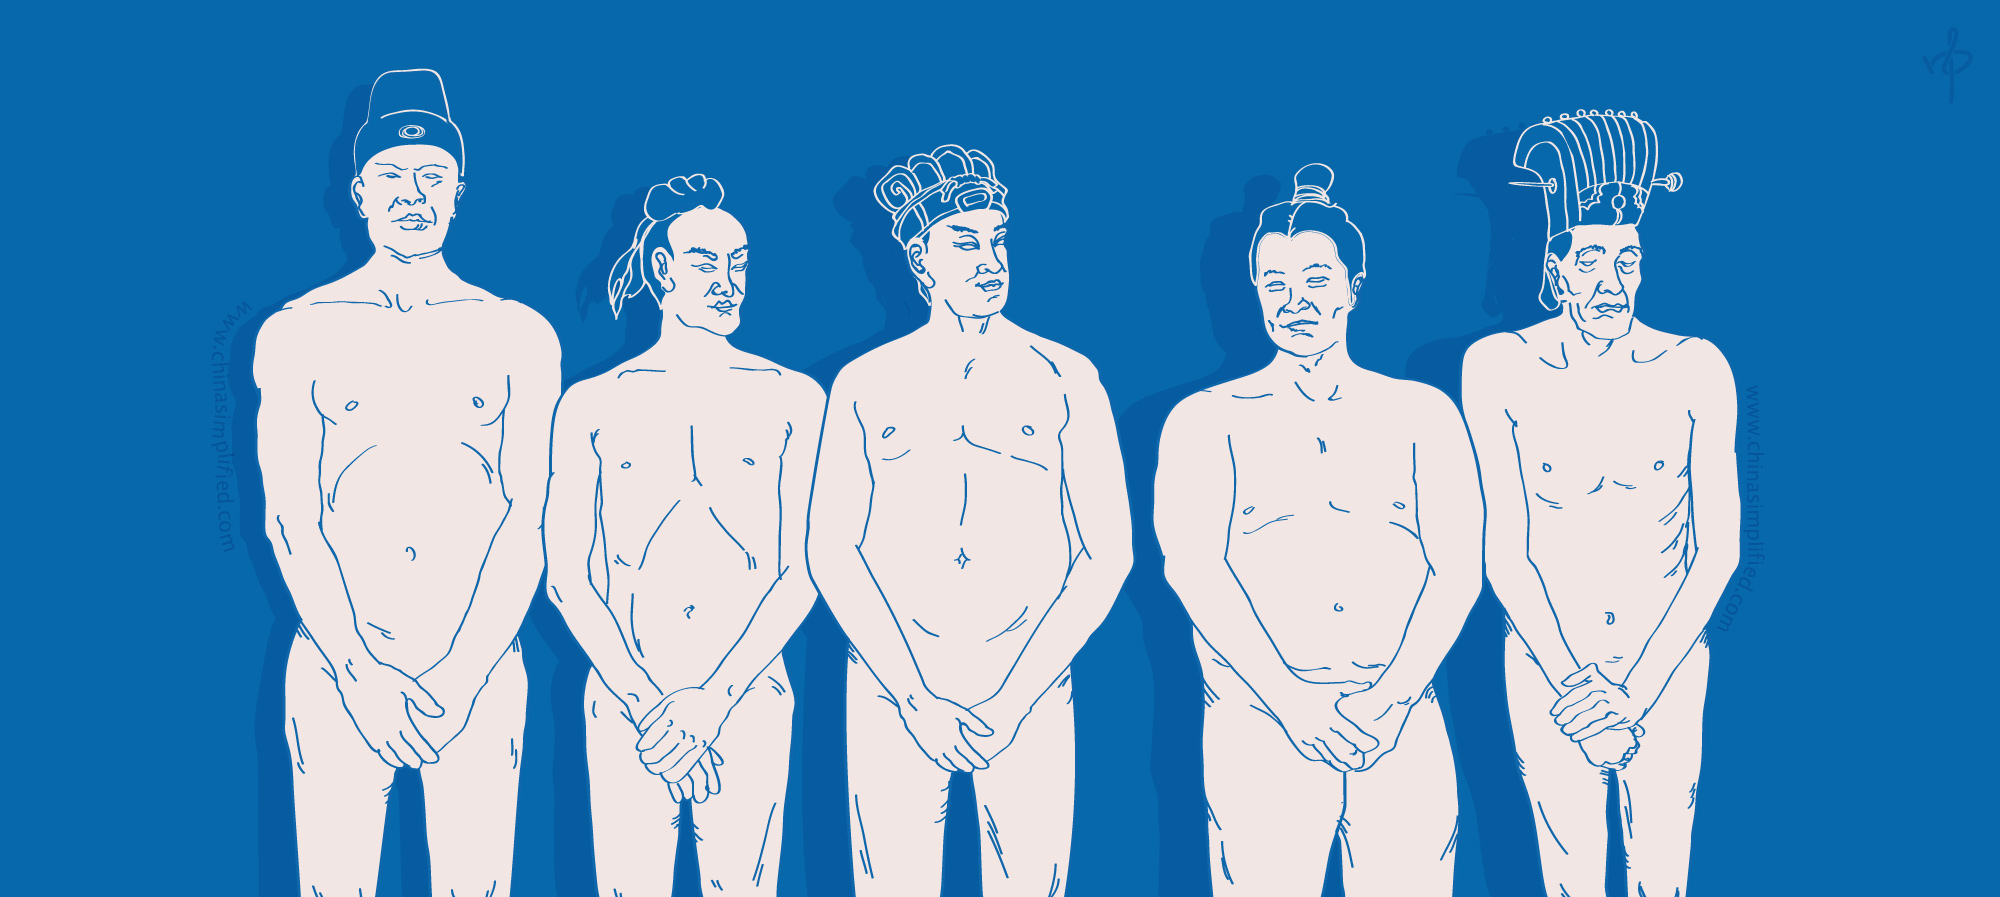 Chinese Eunuchs – How They Became “Unnatural Men”